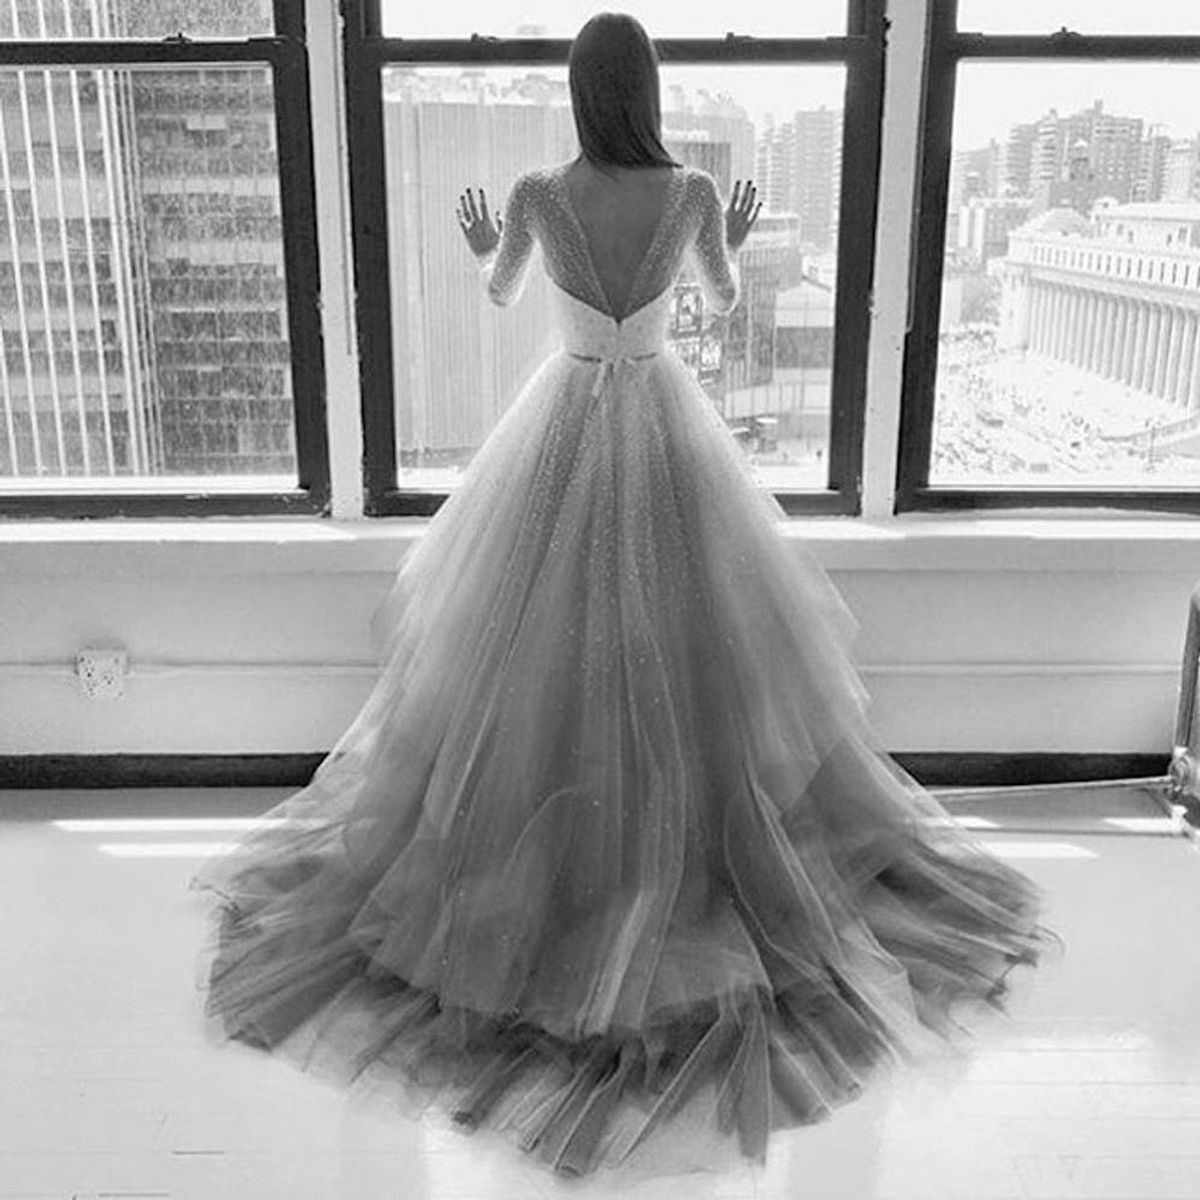 Christian Siriano Just Designed the Wedding Dress of Your Dreams